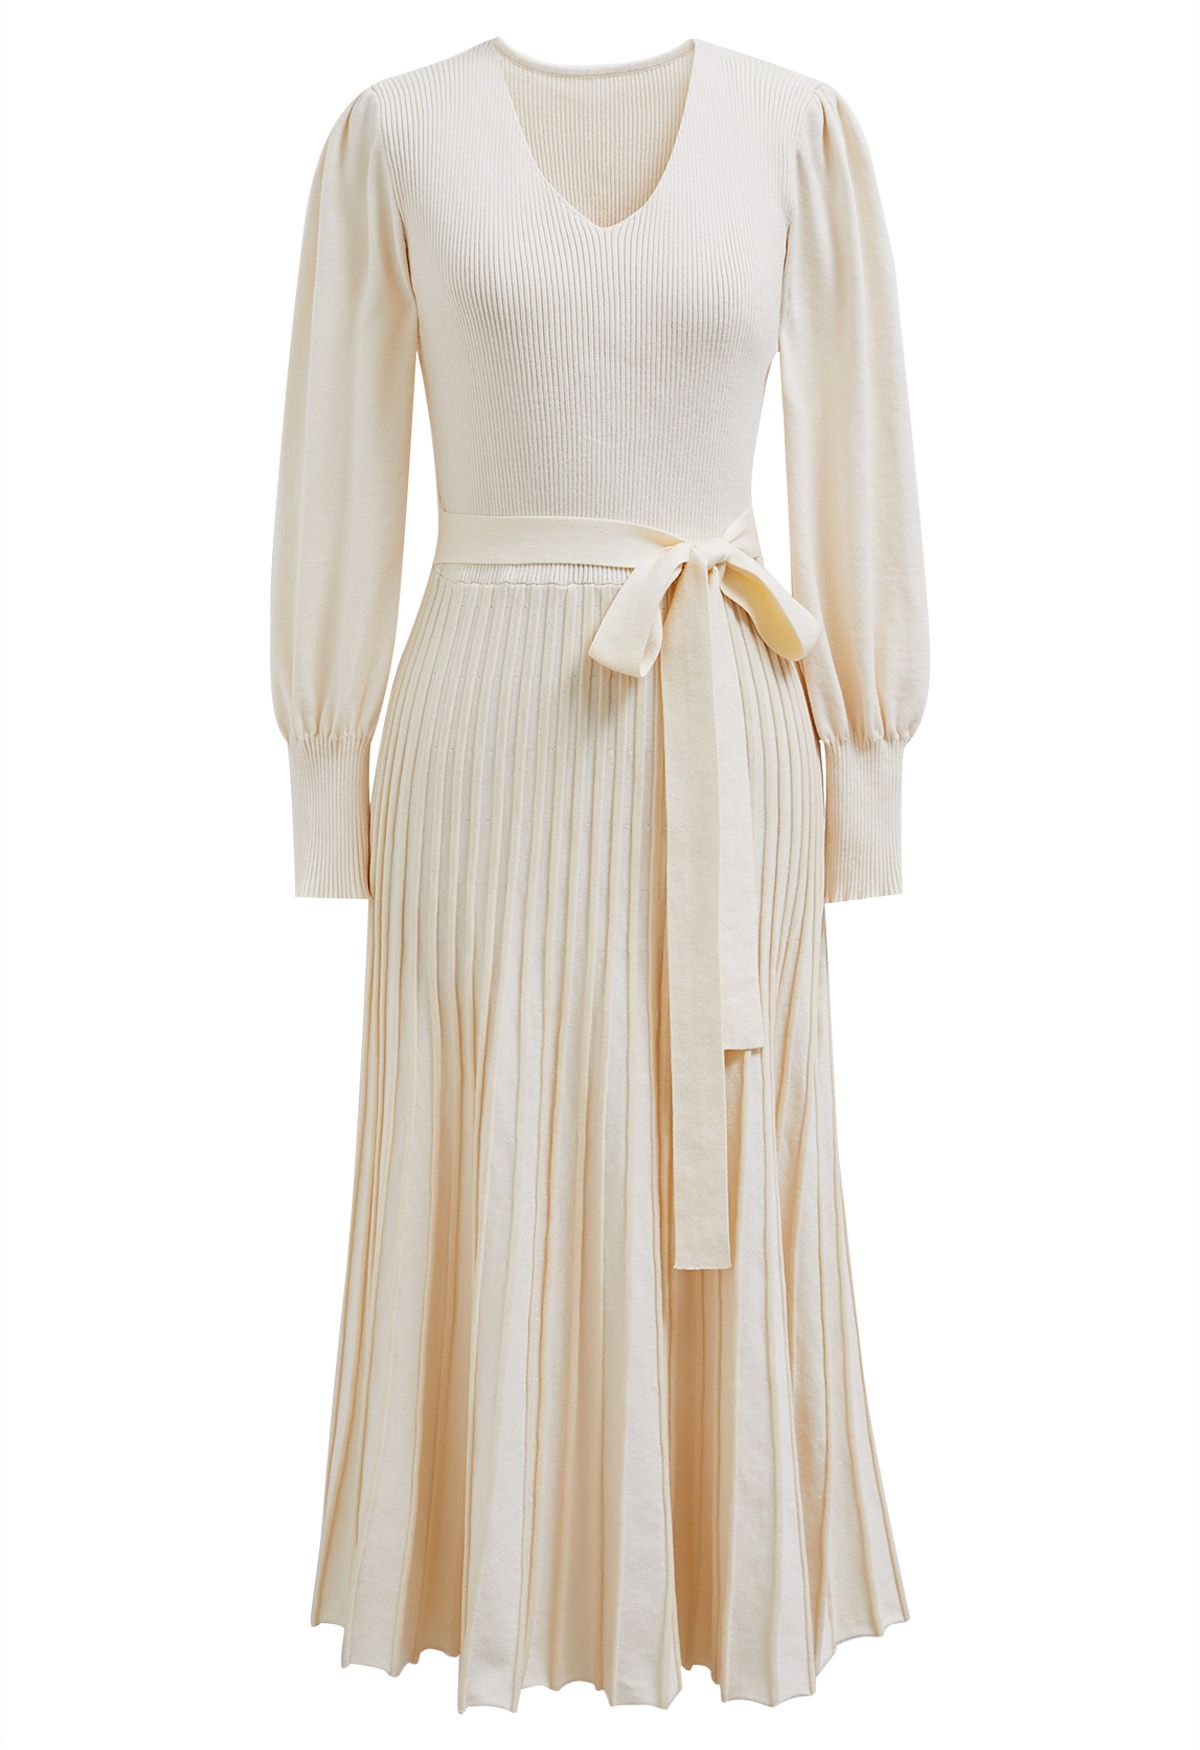 Captivating V-Neck Tie Waist Pleated Knit Dress in Cream